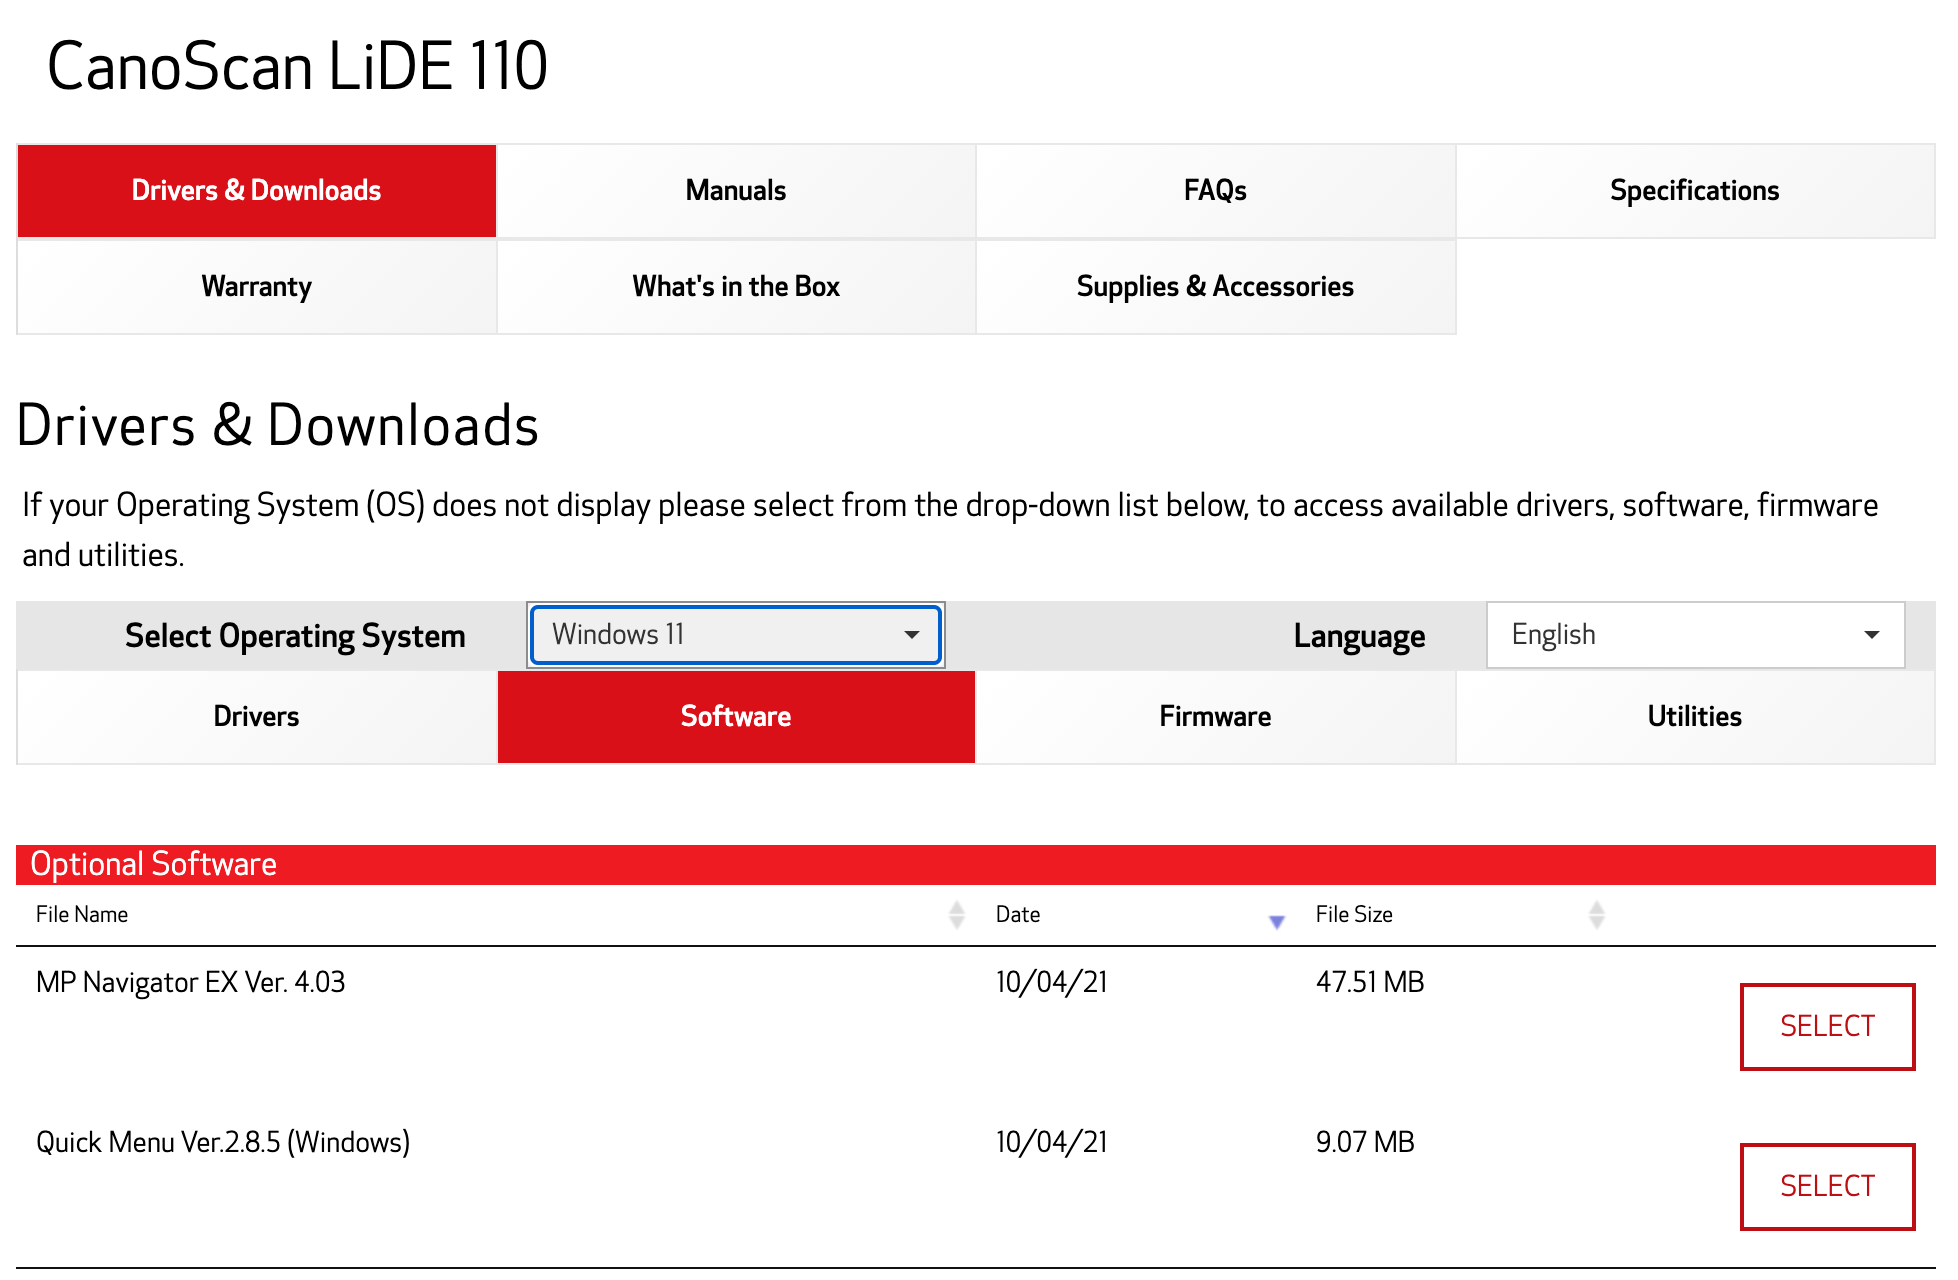 Screenshot of Canon's website showing that they do have Windows software for the LiDE 110